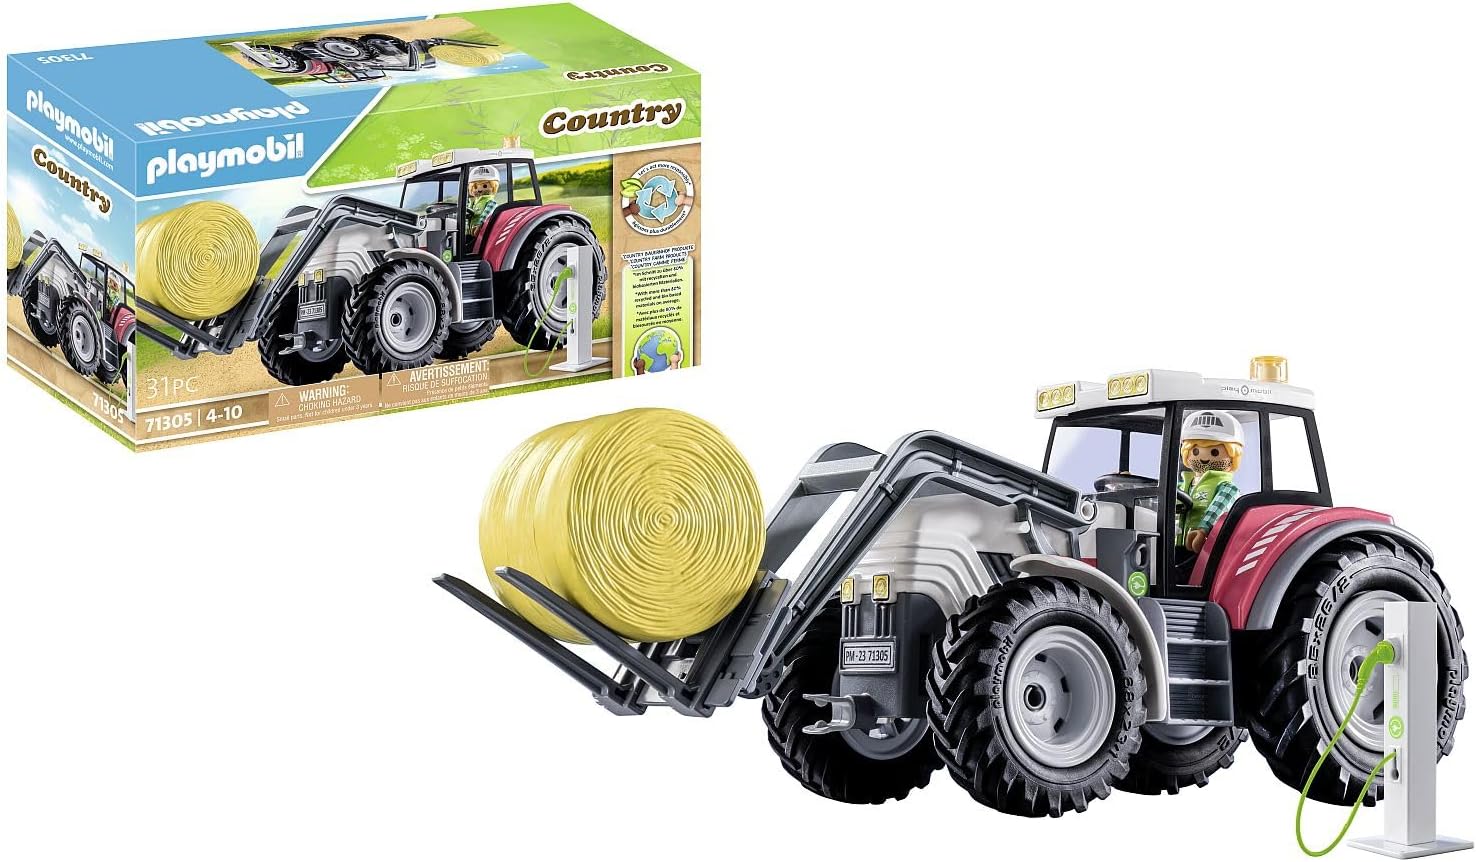 PLAYMOBIL Country 71305 Large Tractor, Electric Powered Tractor with Hinged Roof and Electric Charging Station, Toy for Children from 4 Years